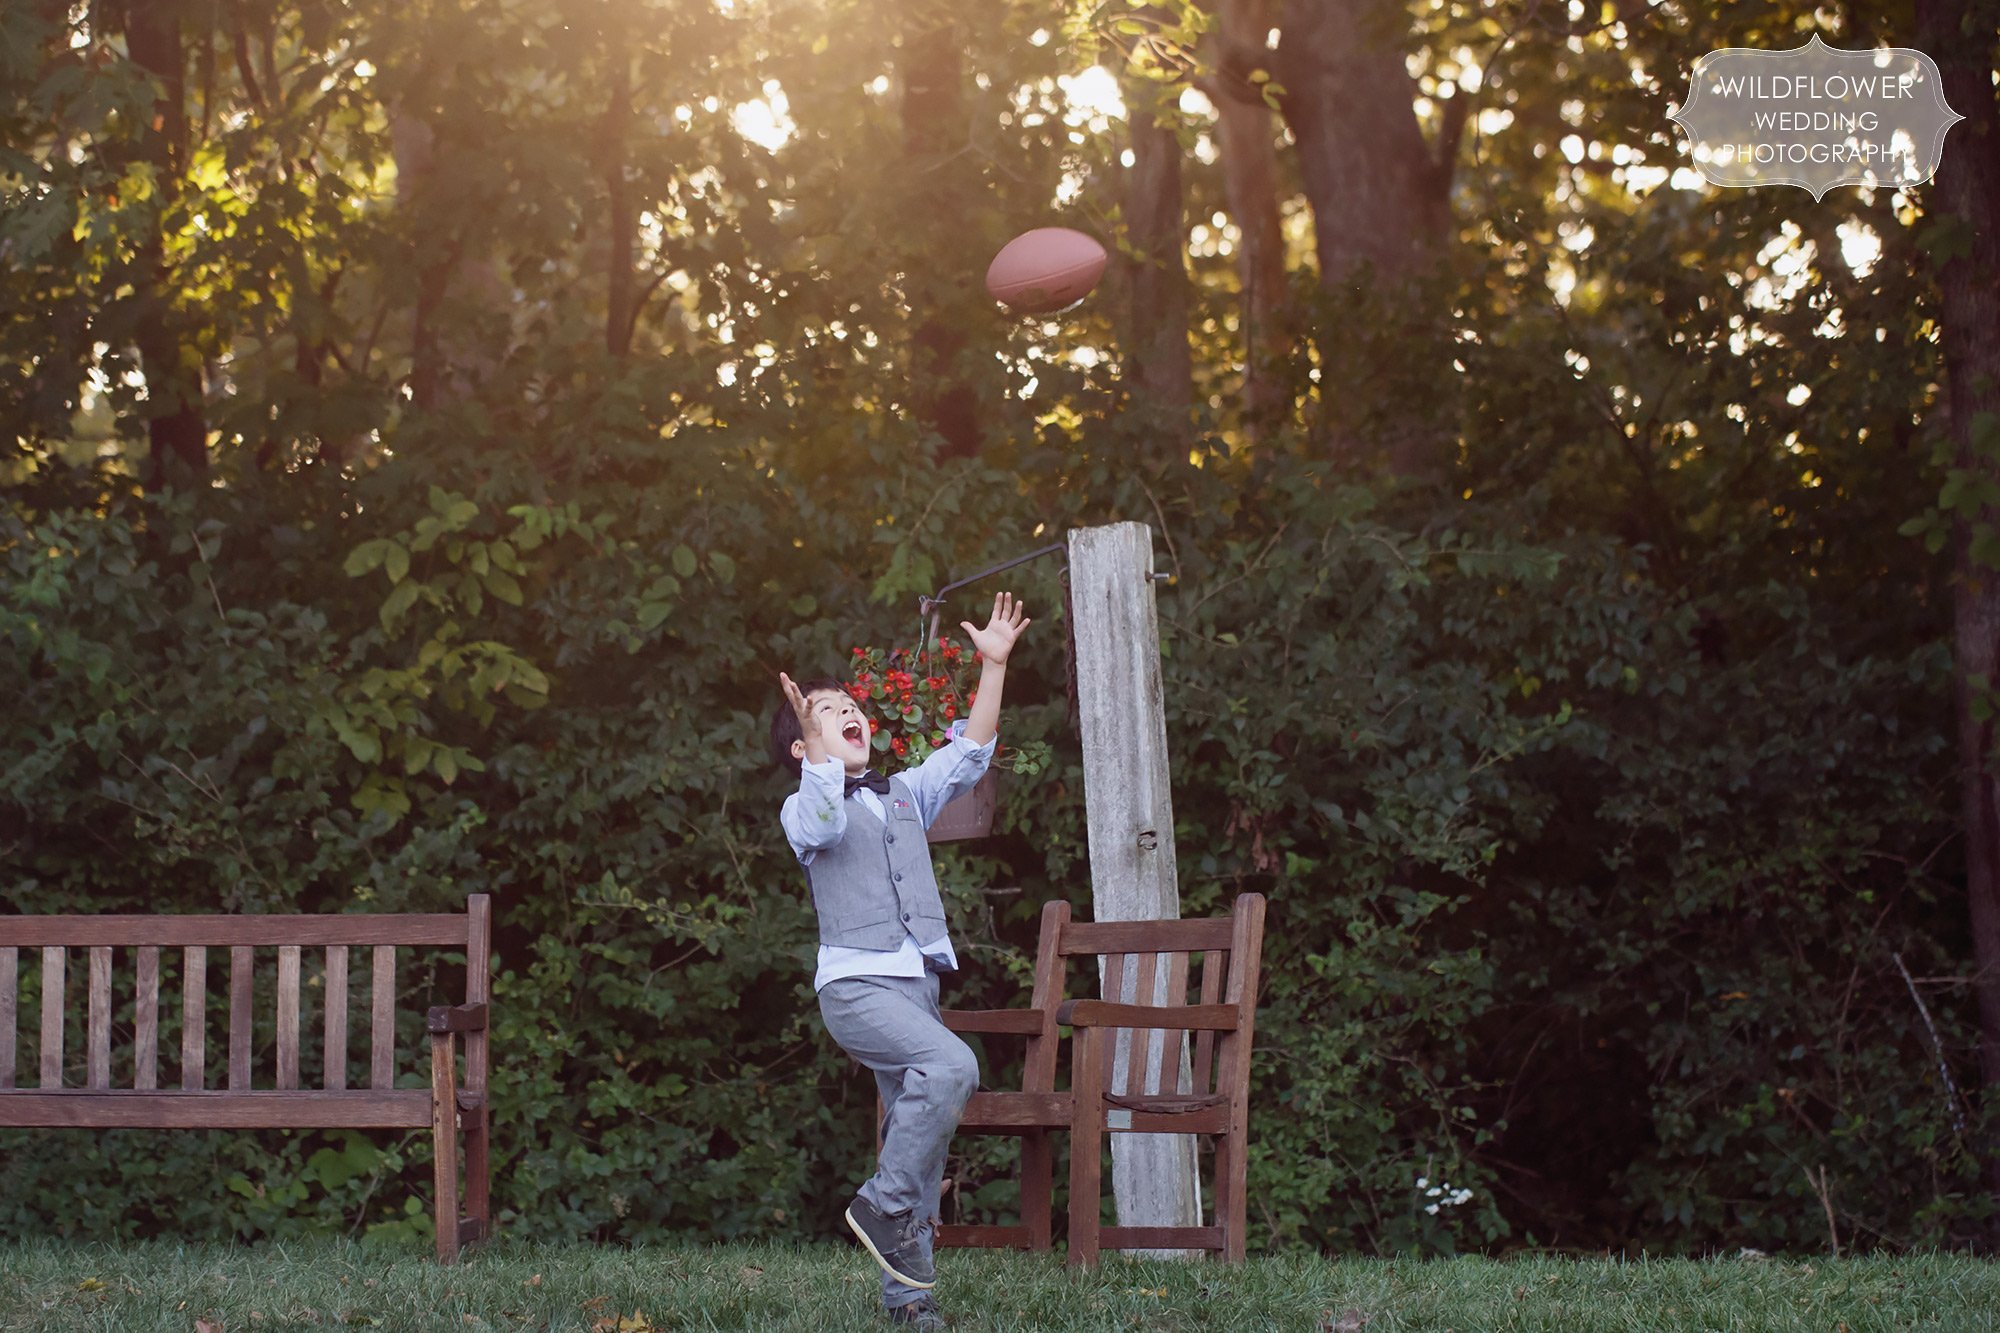 The kids at this Missouri backyard wedding were playing touch football!